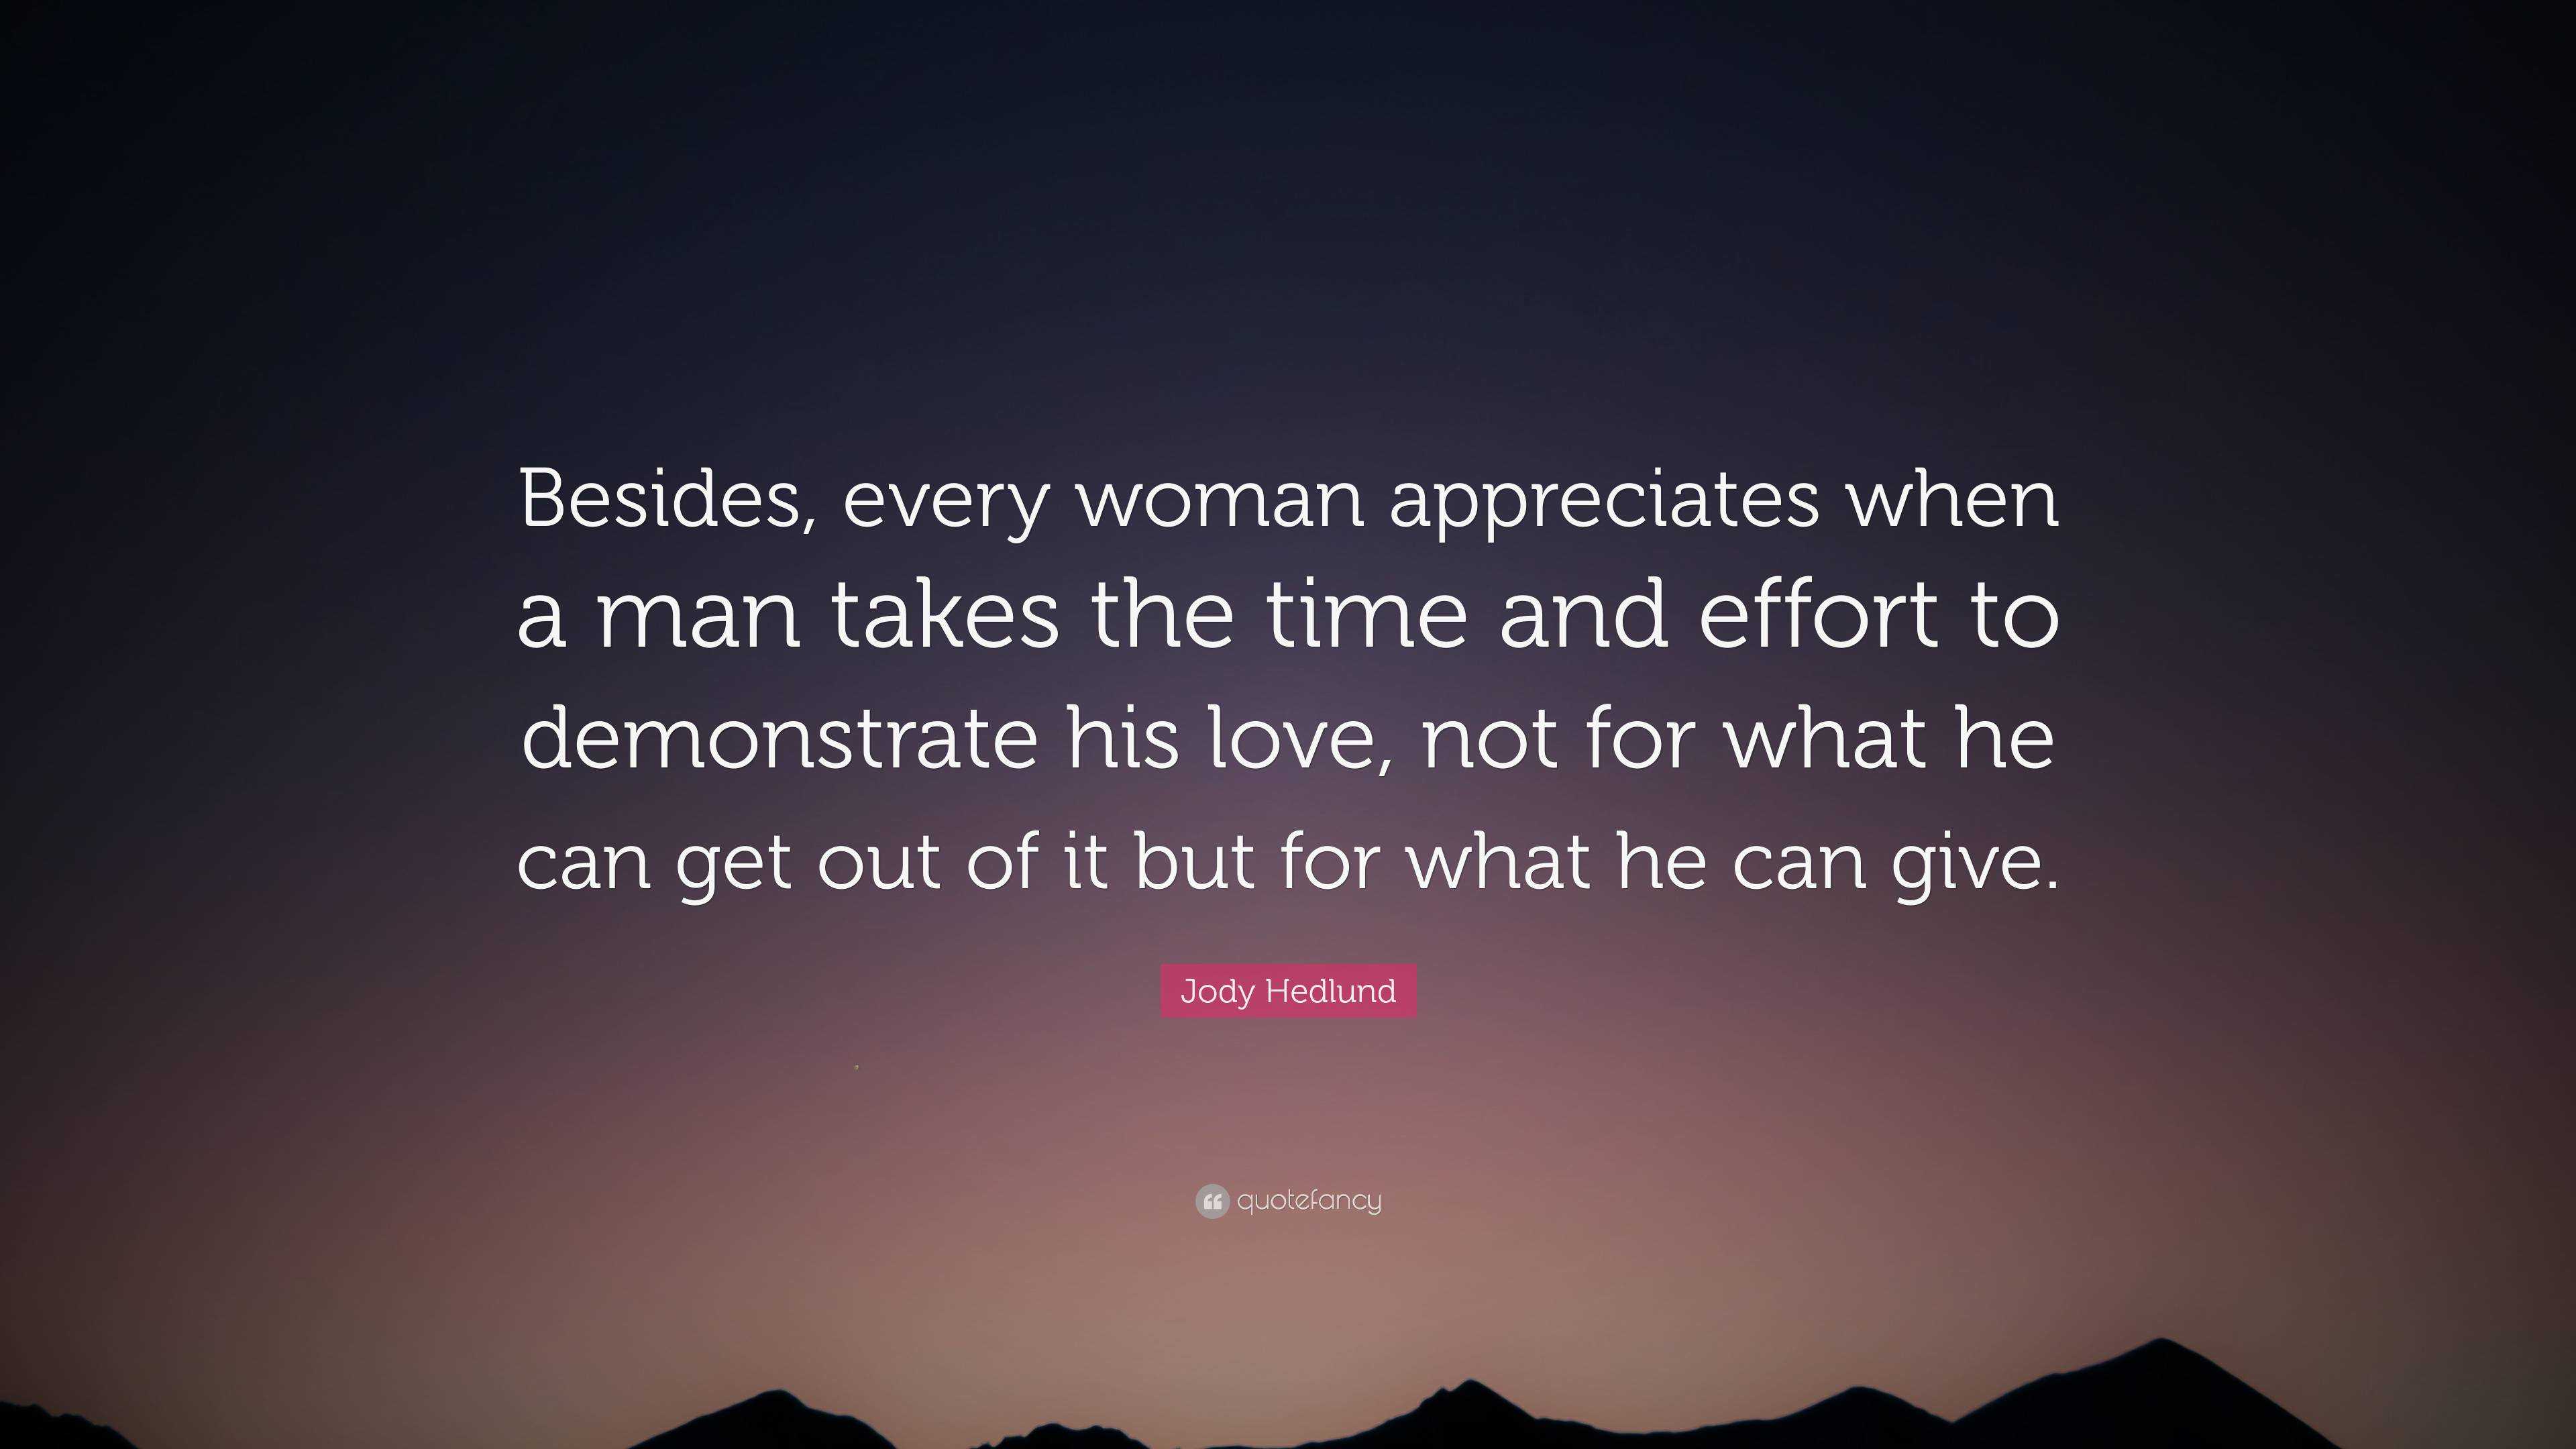 Jody Hedlund Quote: “Besides, every woman appreciates when a man takes ...